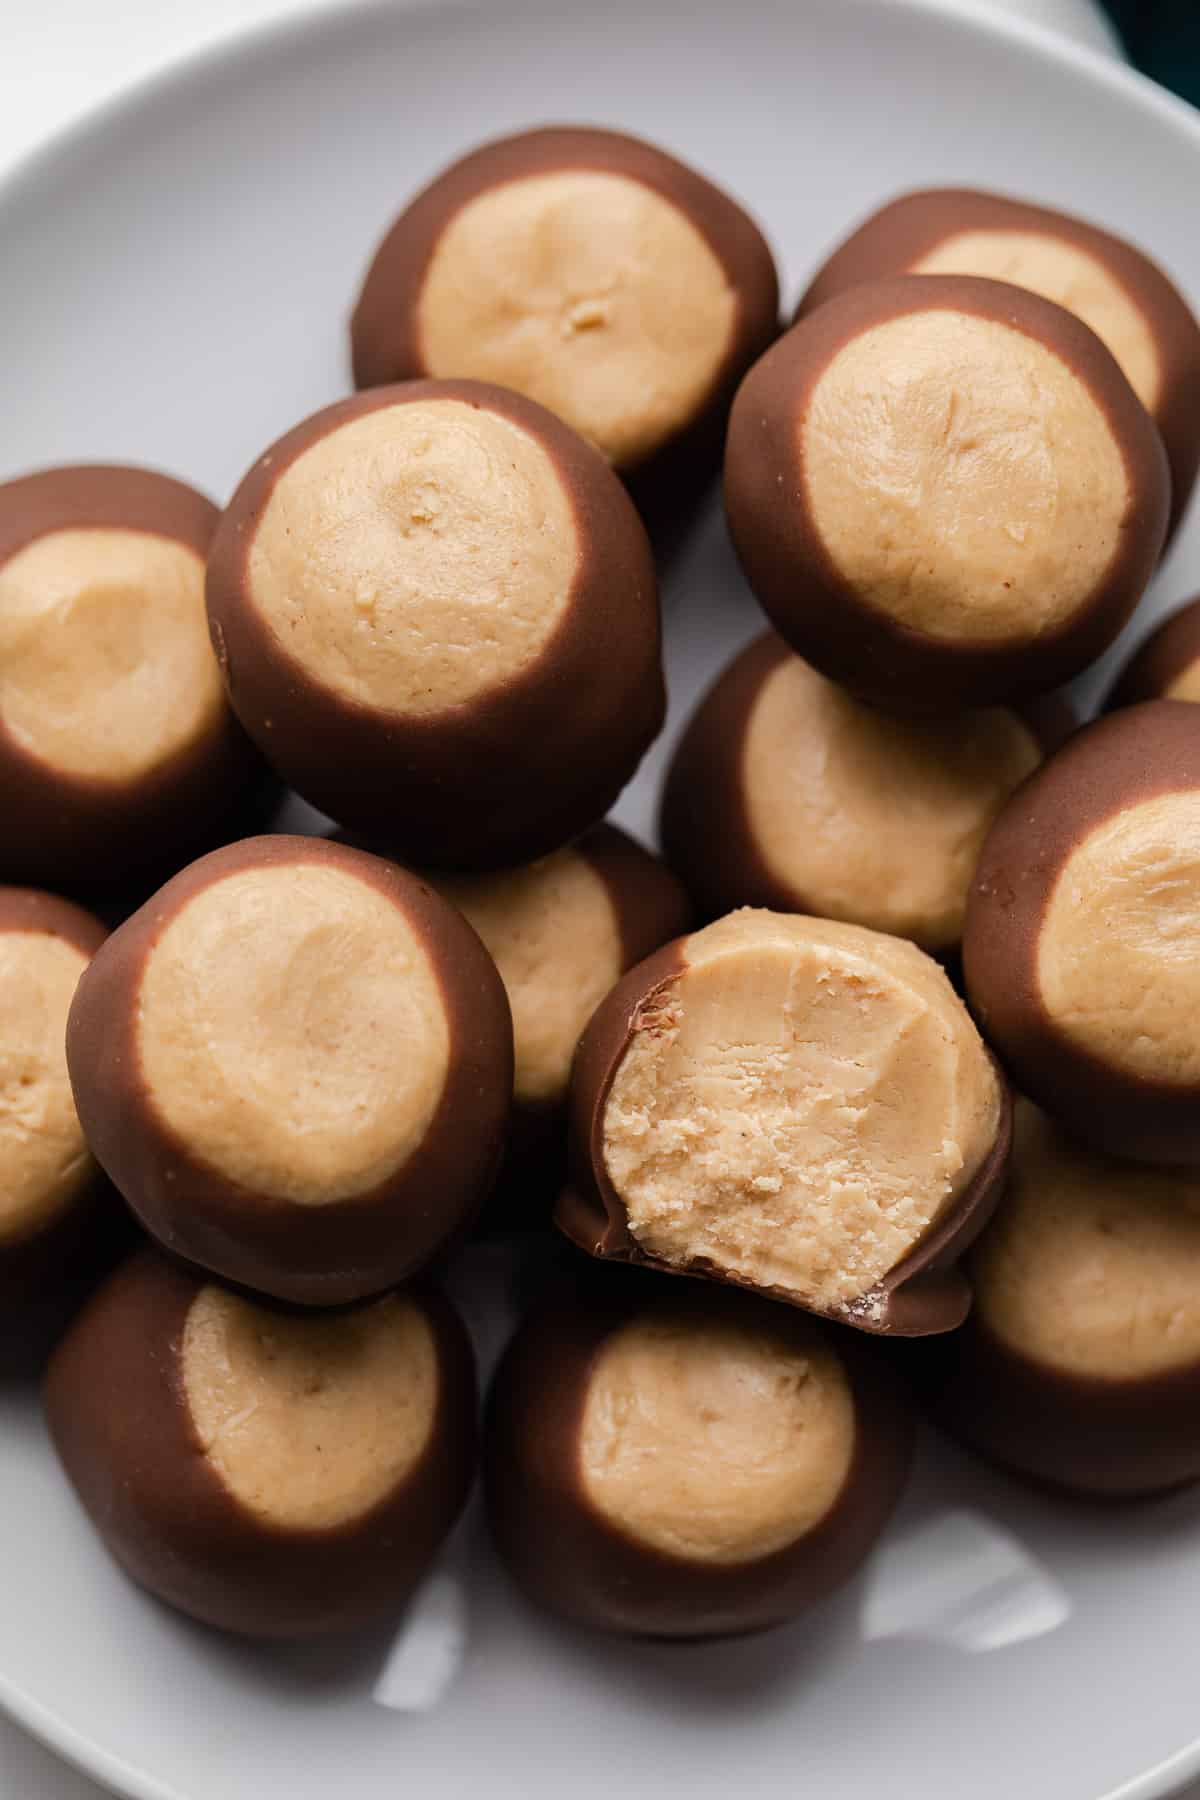 Close up of buckeye candy on a white plate with a bite taken out so the inside is visible